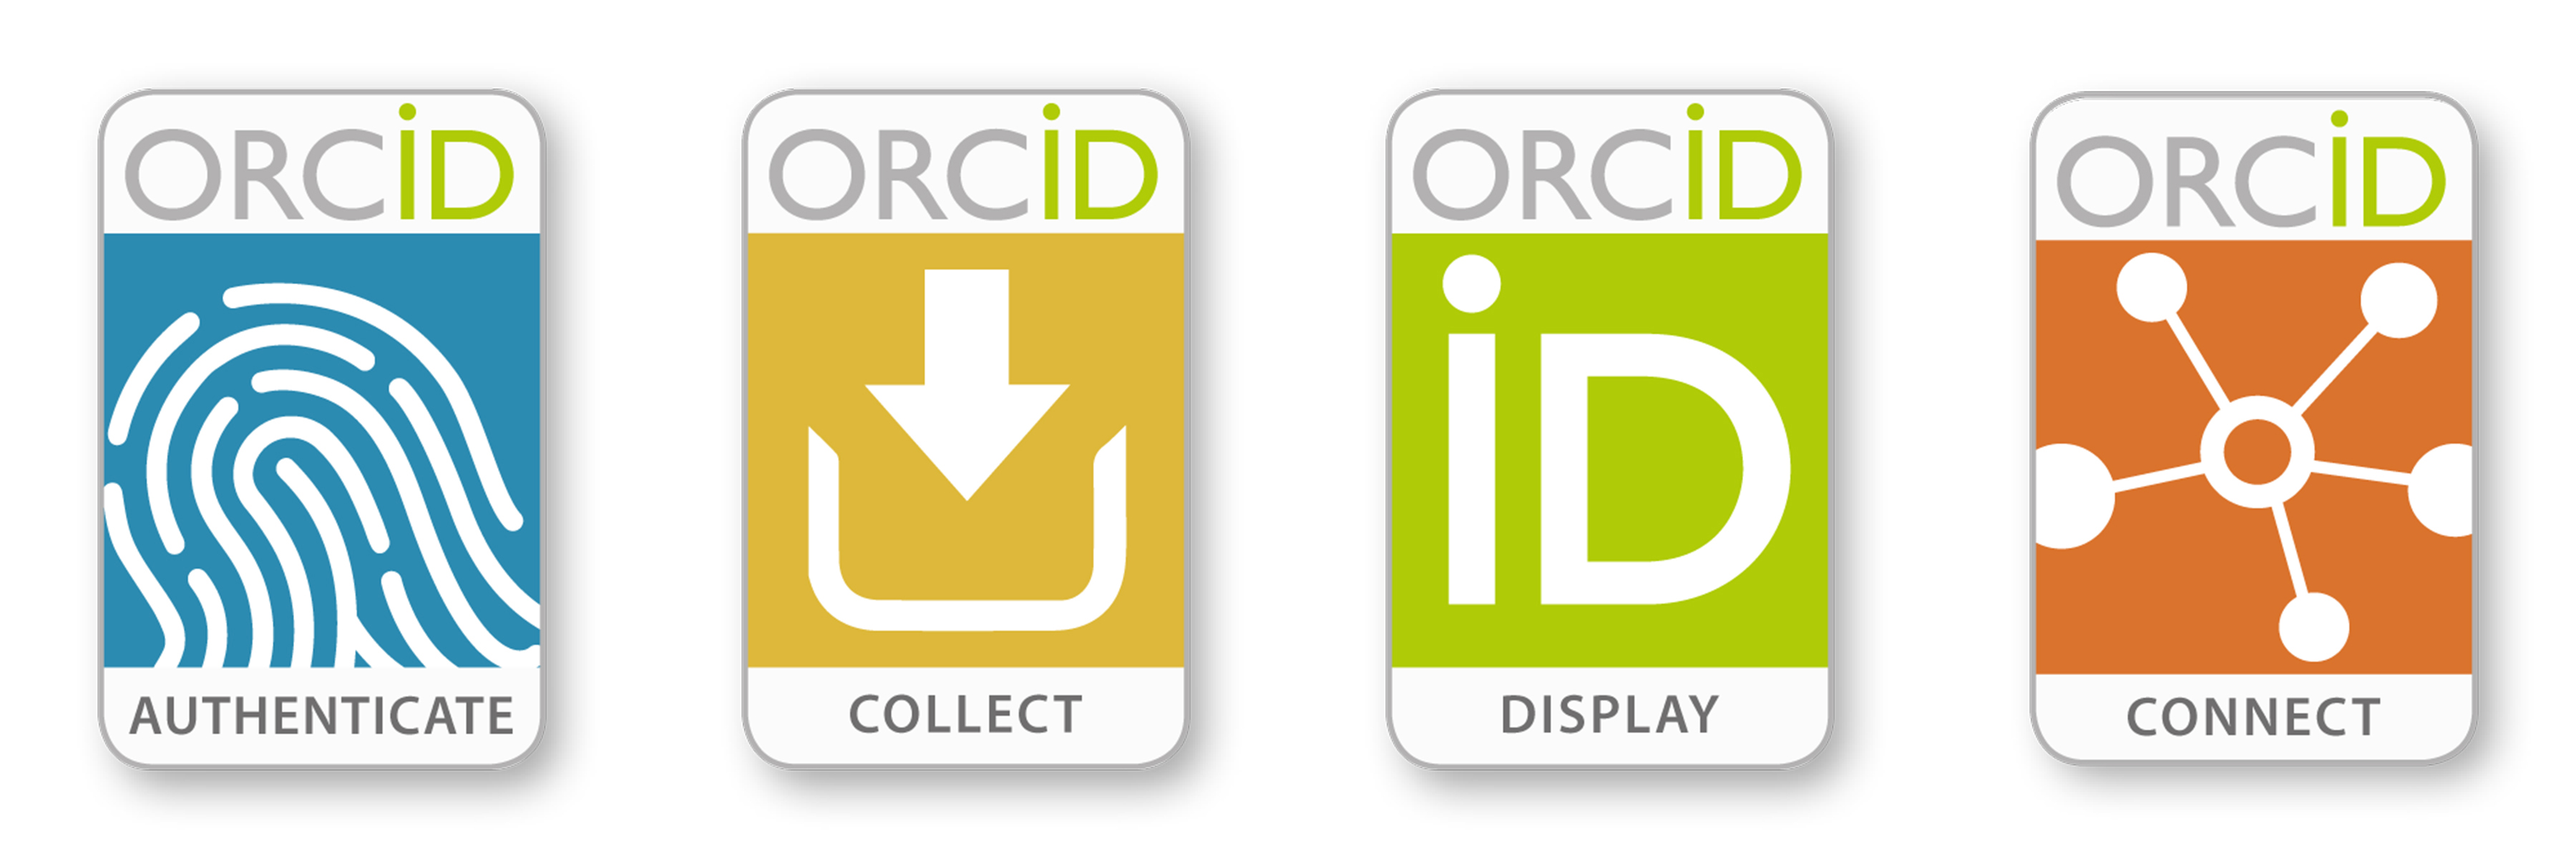 ORCID-Badges-00-03-s-all_3600.jpg